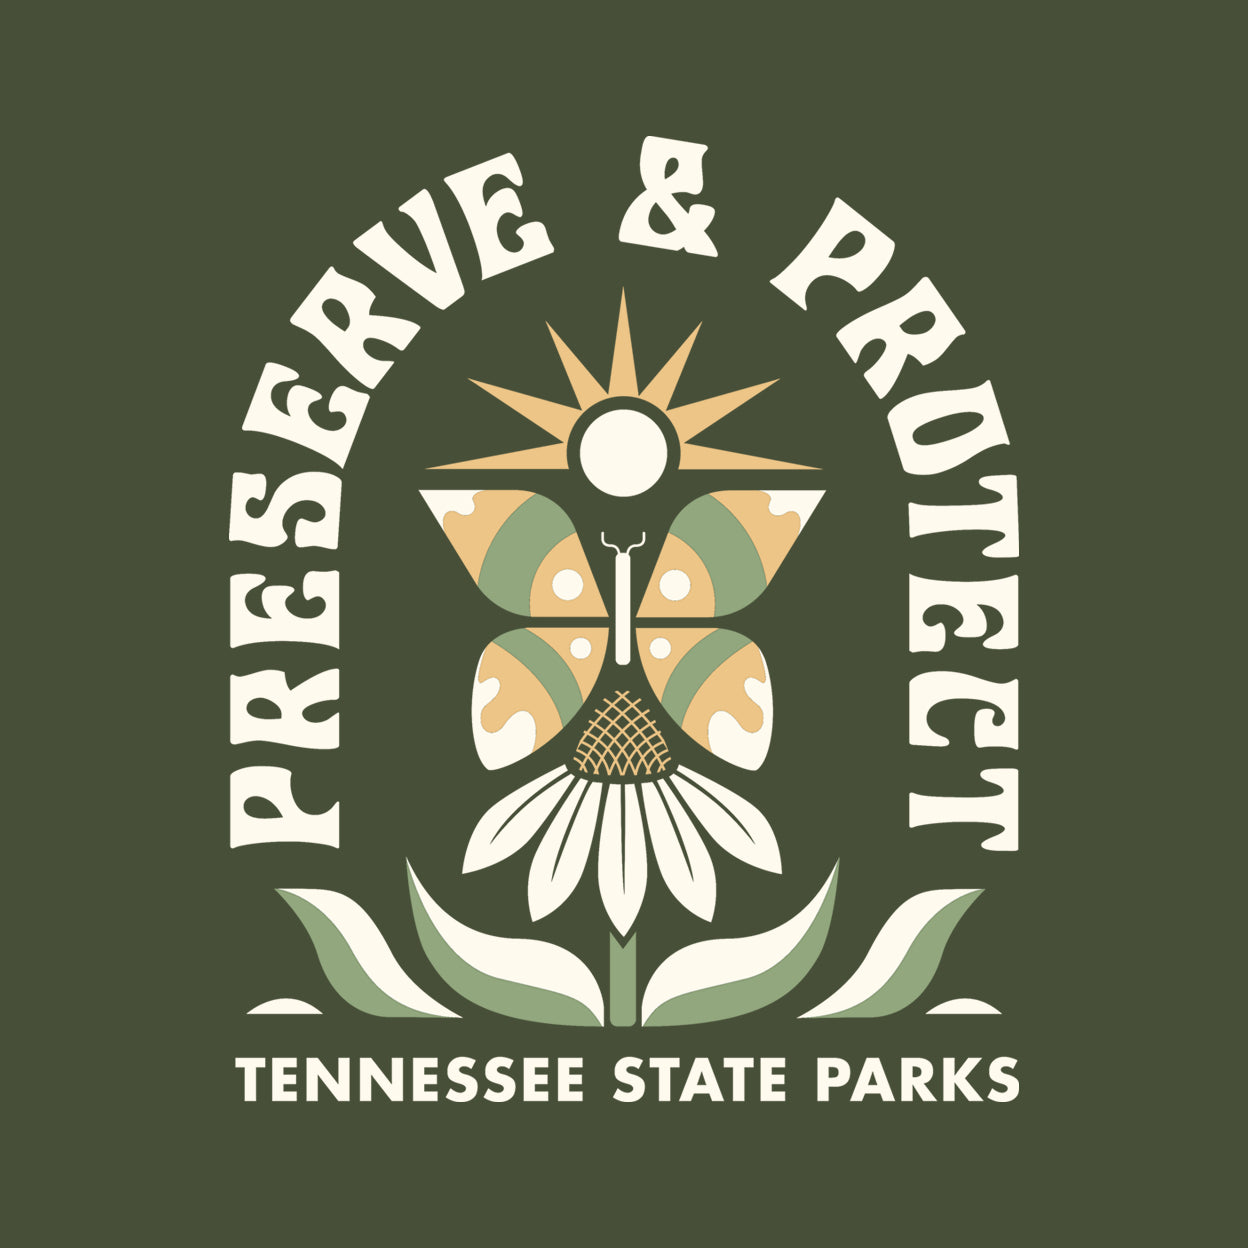 TNSP - Preserve & Protect Butterfly Tee